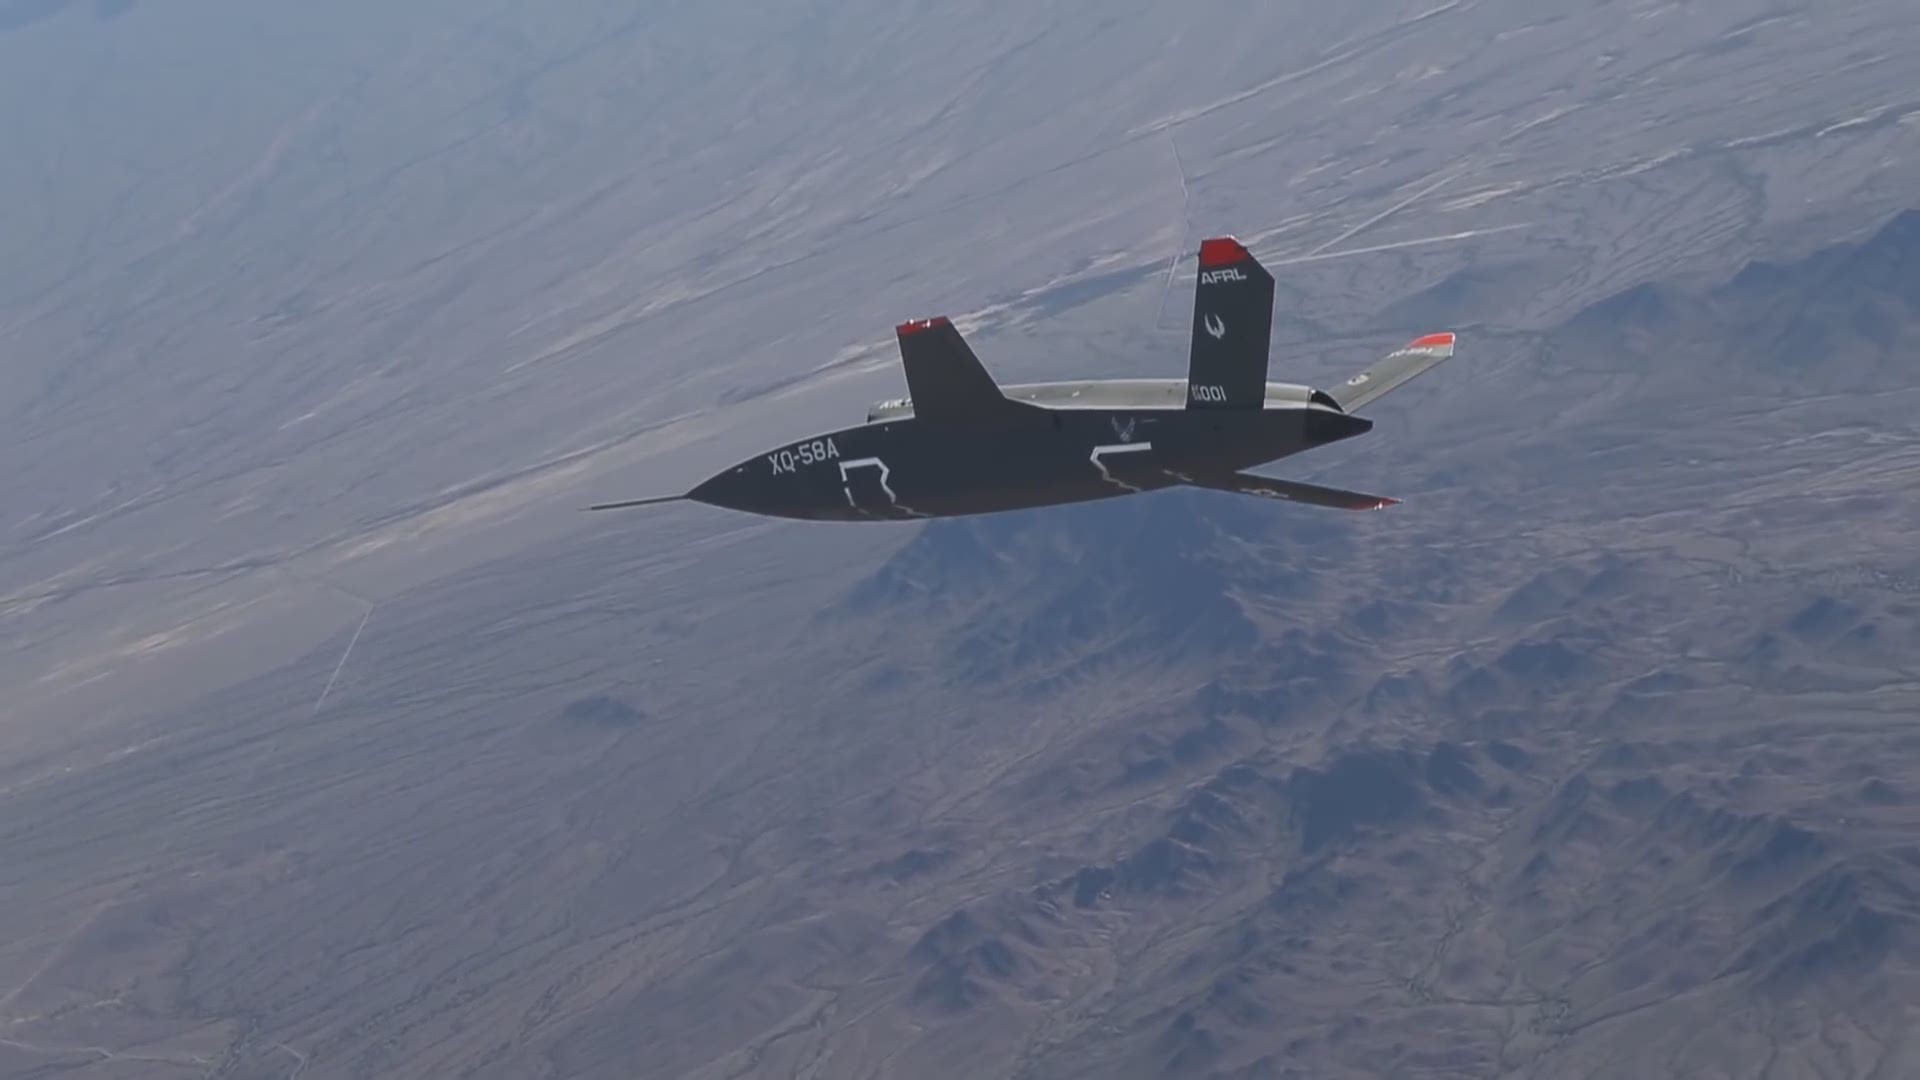 The XQ-58A Valkyrie demonstrator finished its inaugural flight on March 5 at Yuma Proving Grounds in Arizona. (Video Credit: U.S. Air Force via the Air Force Research Lab)